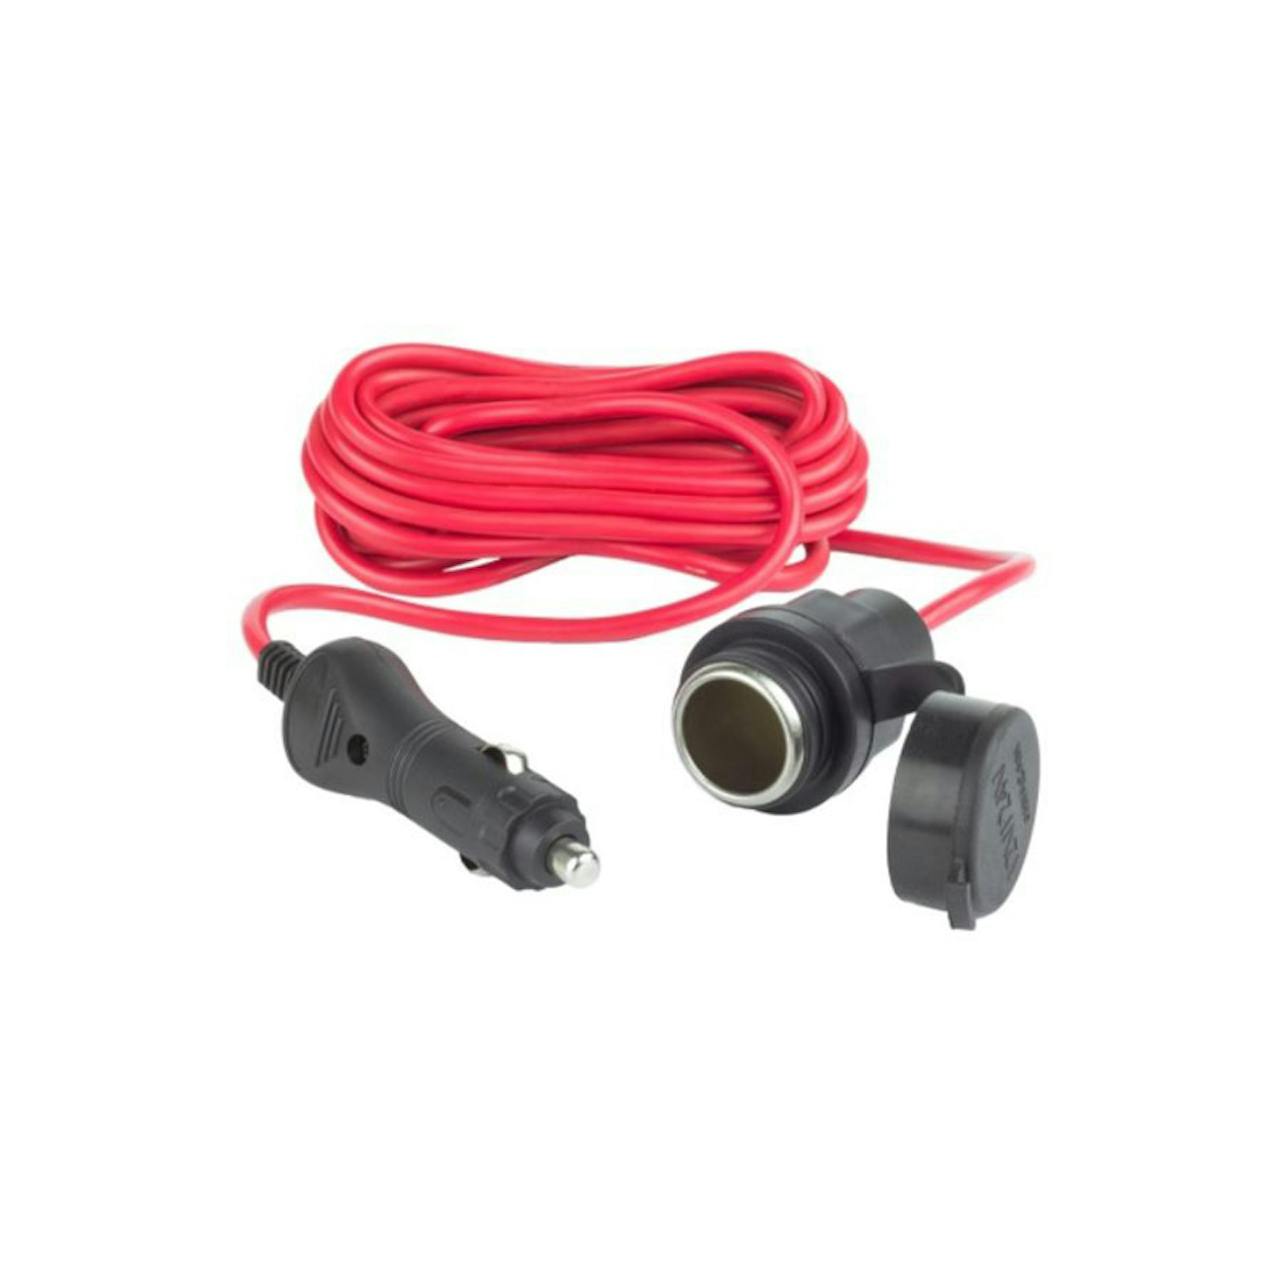 12V/24V DC Extension Cable By Wagan Tech - Raney's Truck Parts